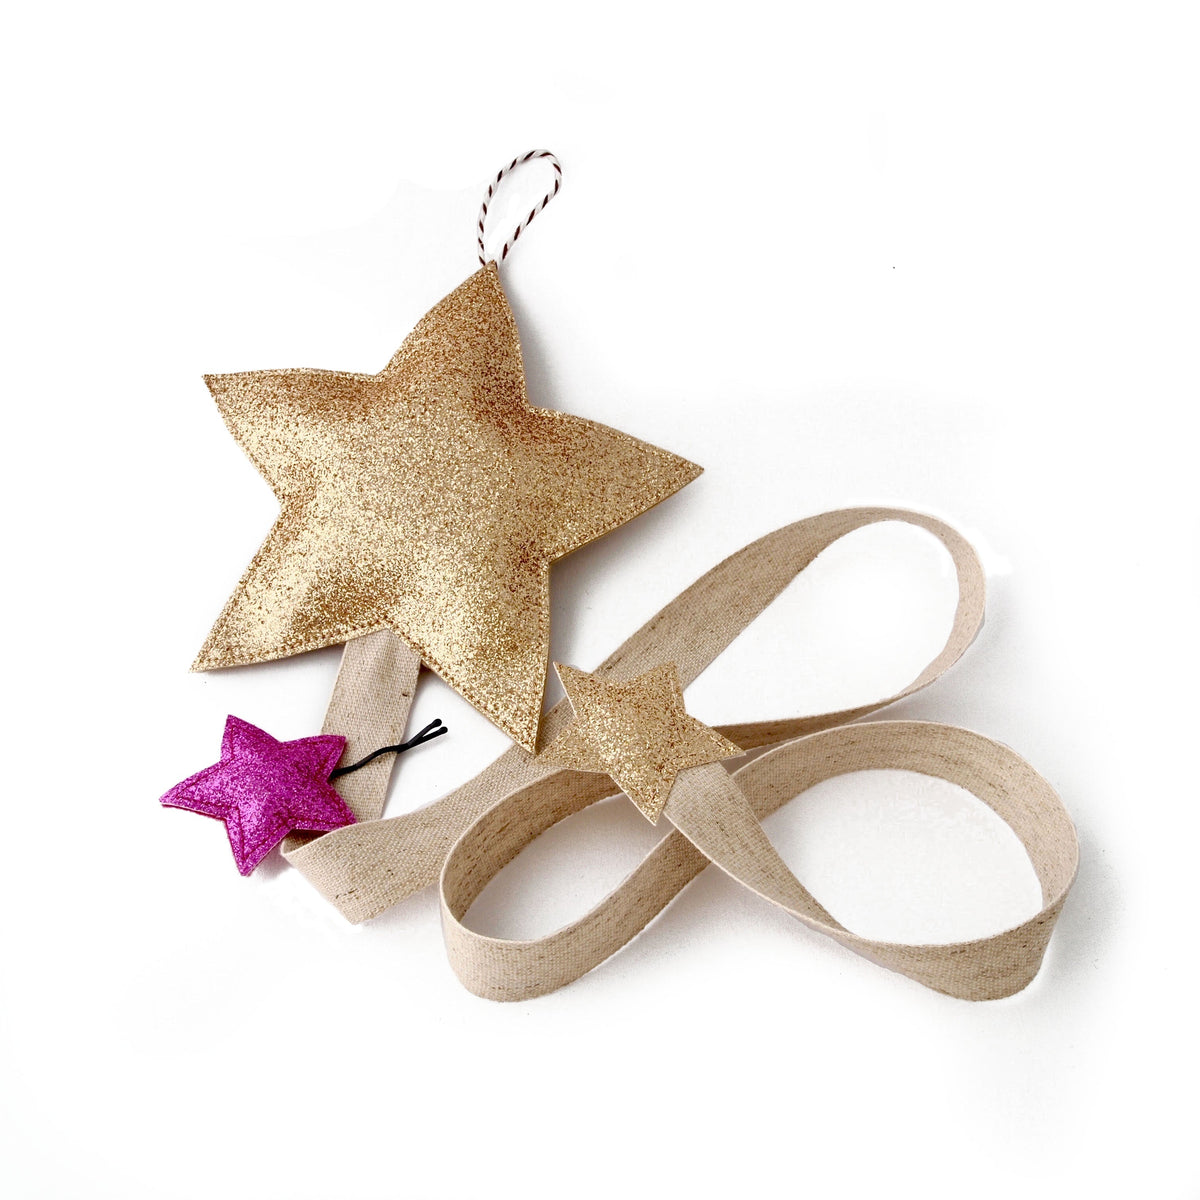 Elegant hair clip holder in the shape of a gold star.  